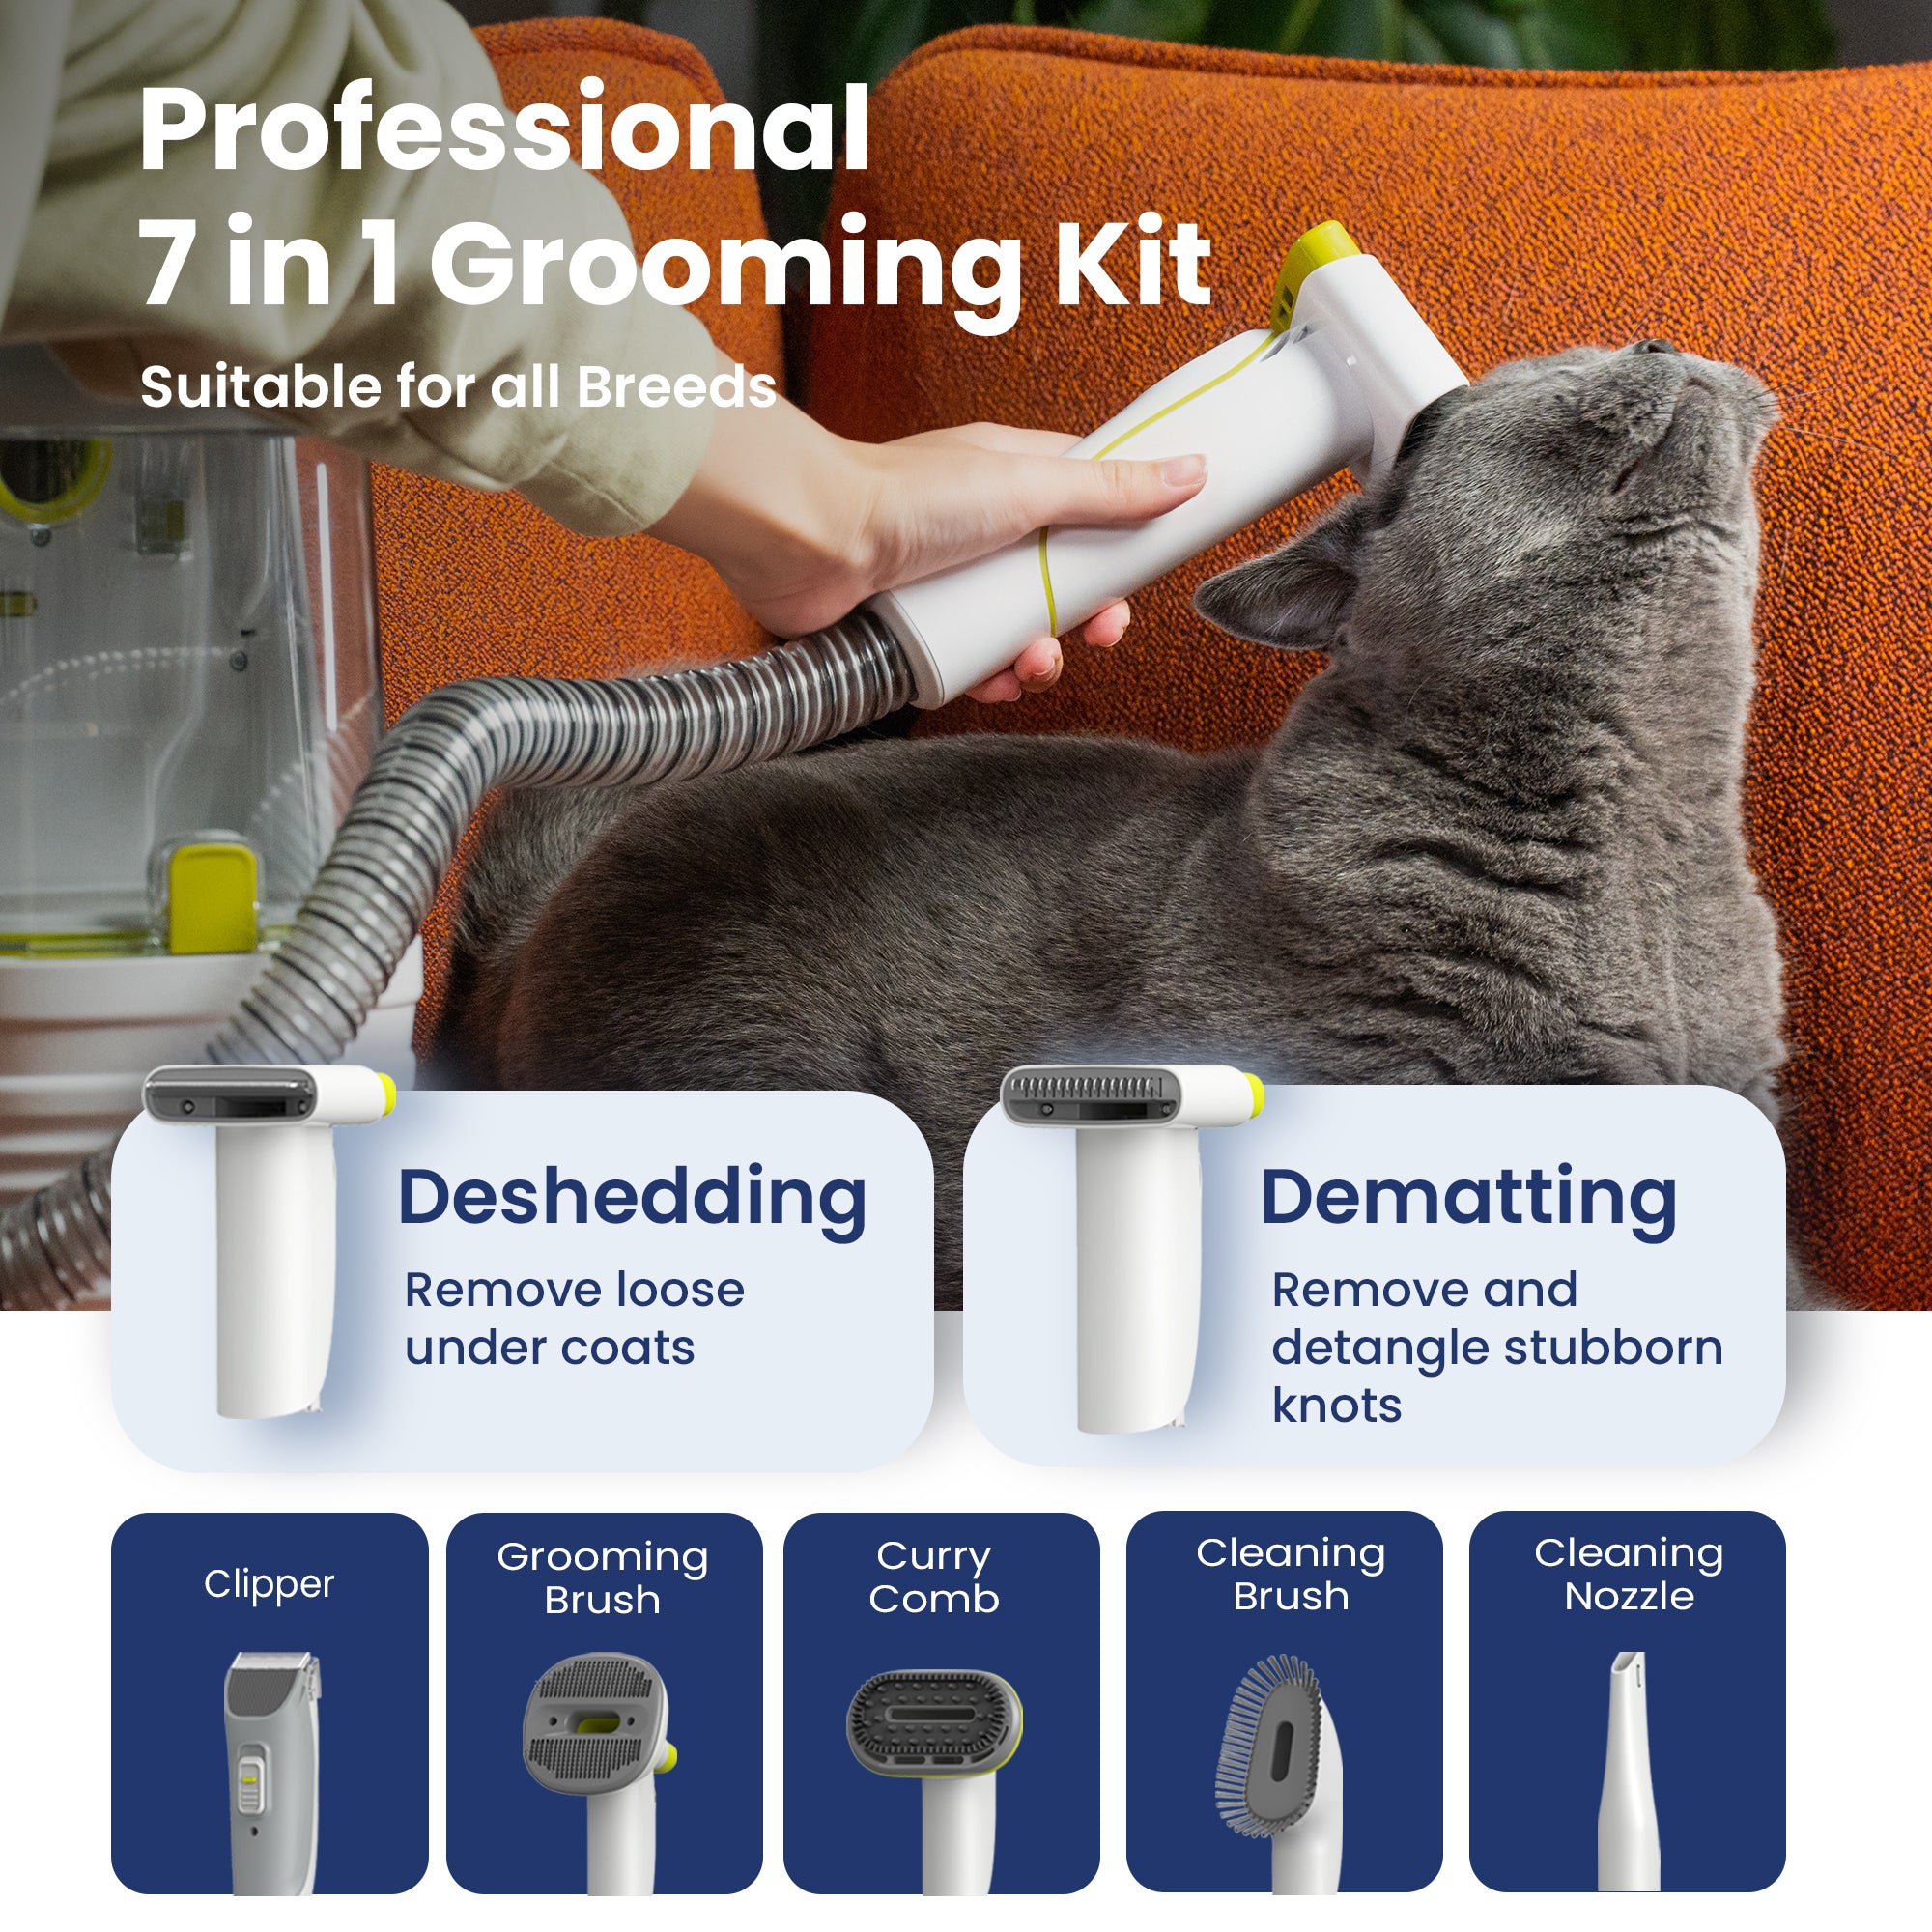 GroomingPro Rx Professional Pet Grooming Kit and Vacuum Cleaner